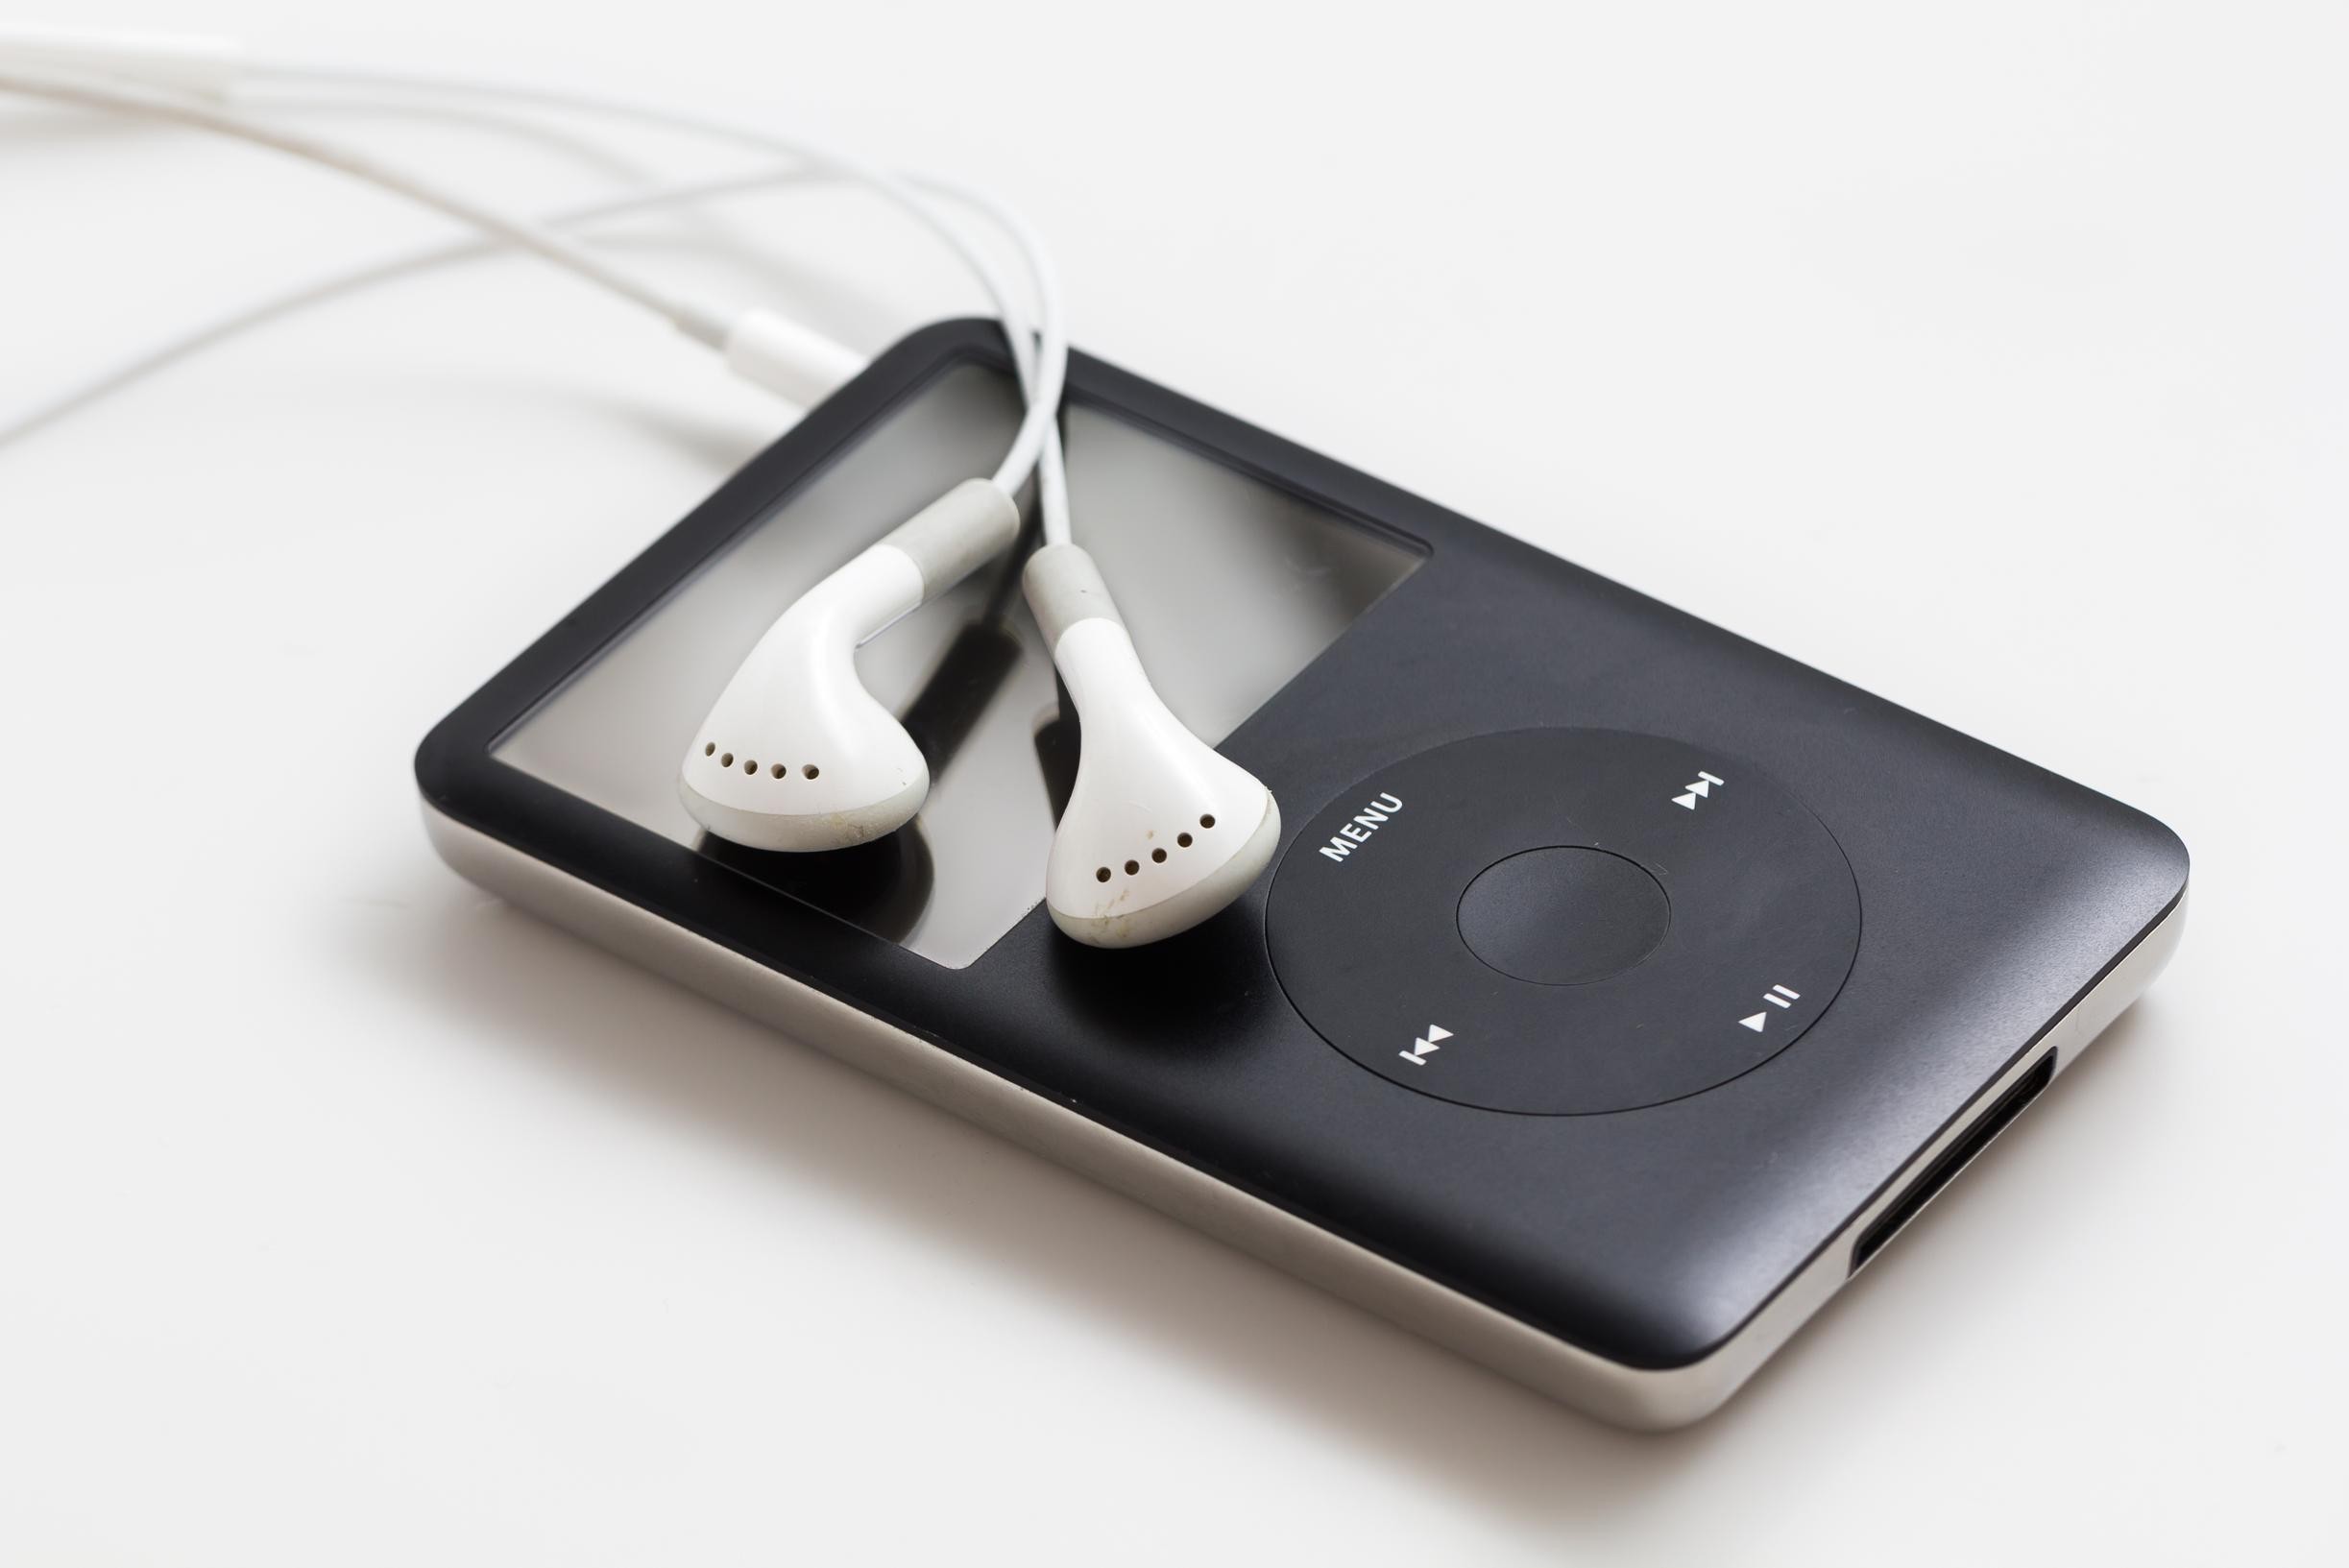 After 20 years, Apple is retiring the iPod: the iconic music player will no longer be produced